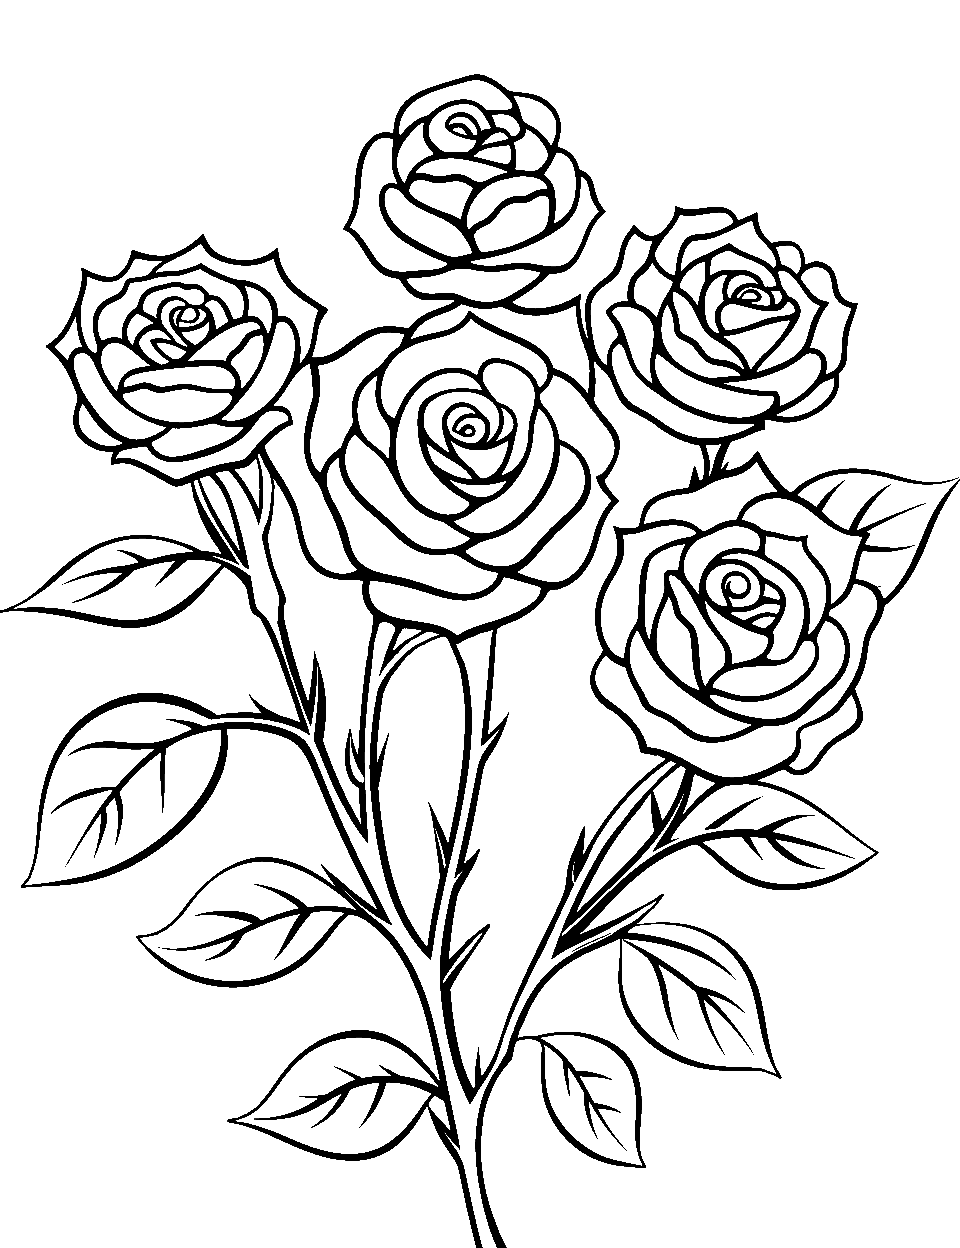 Difficult-to-Color Rose Bush Coloring Page - A complex rose bush with numerous roses.